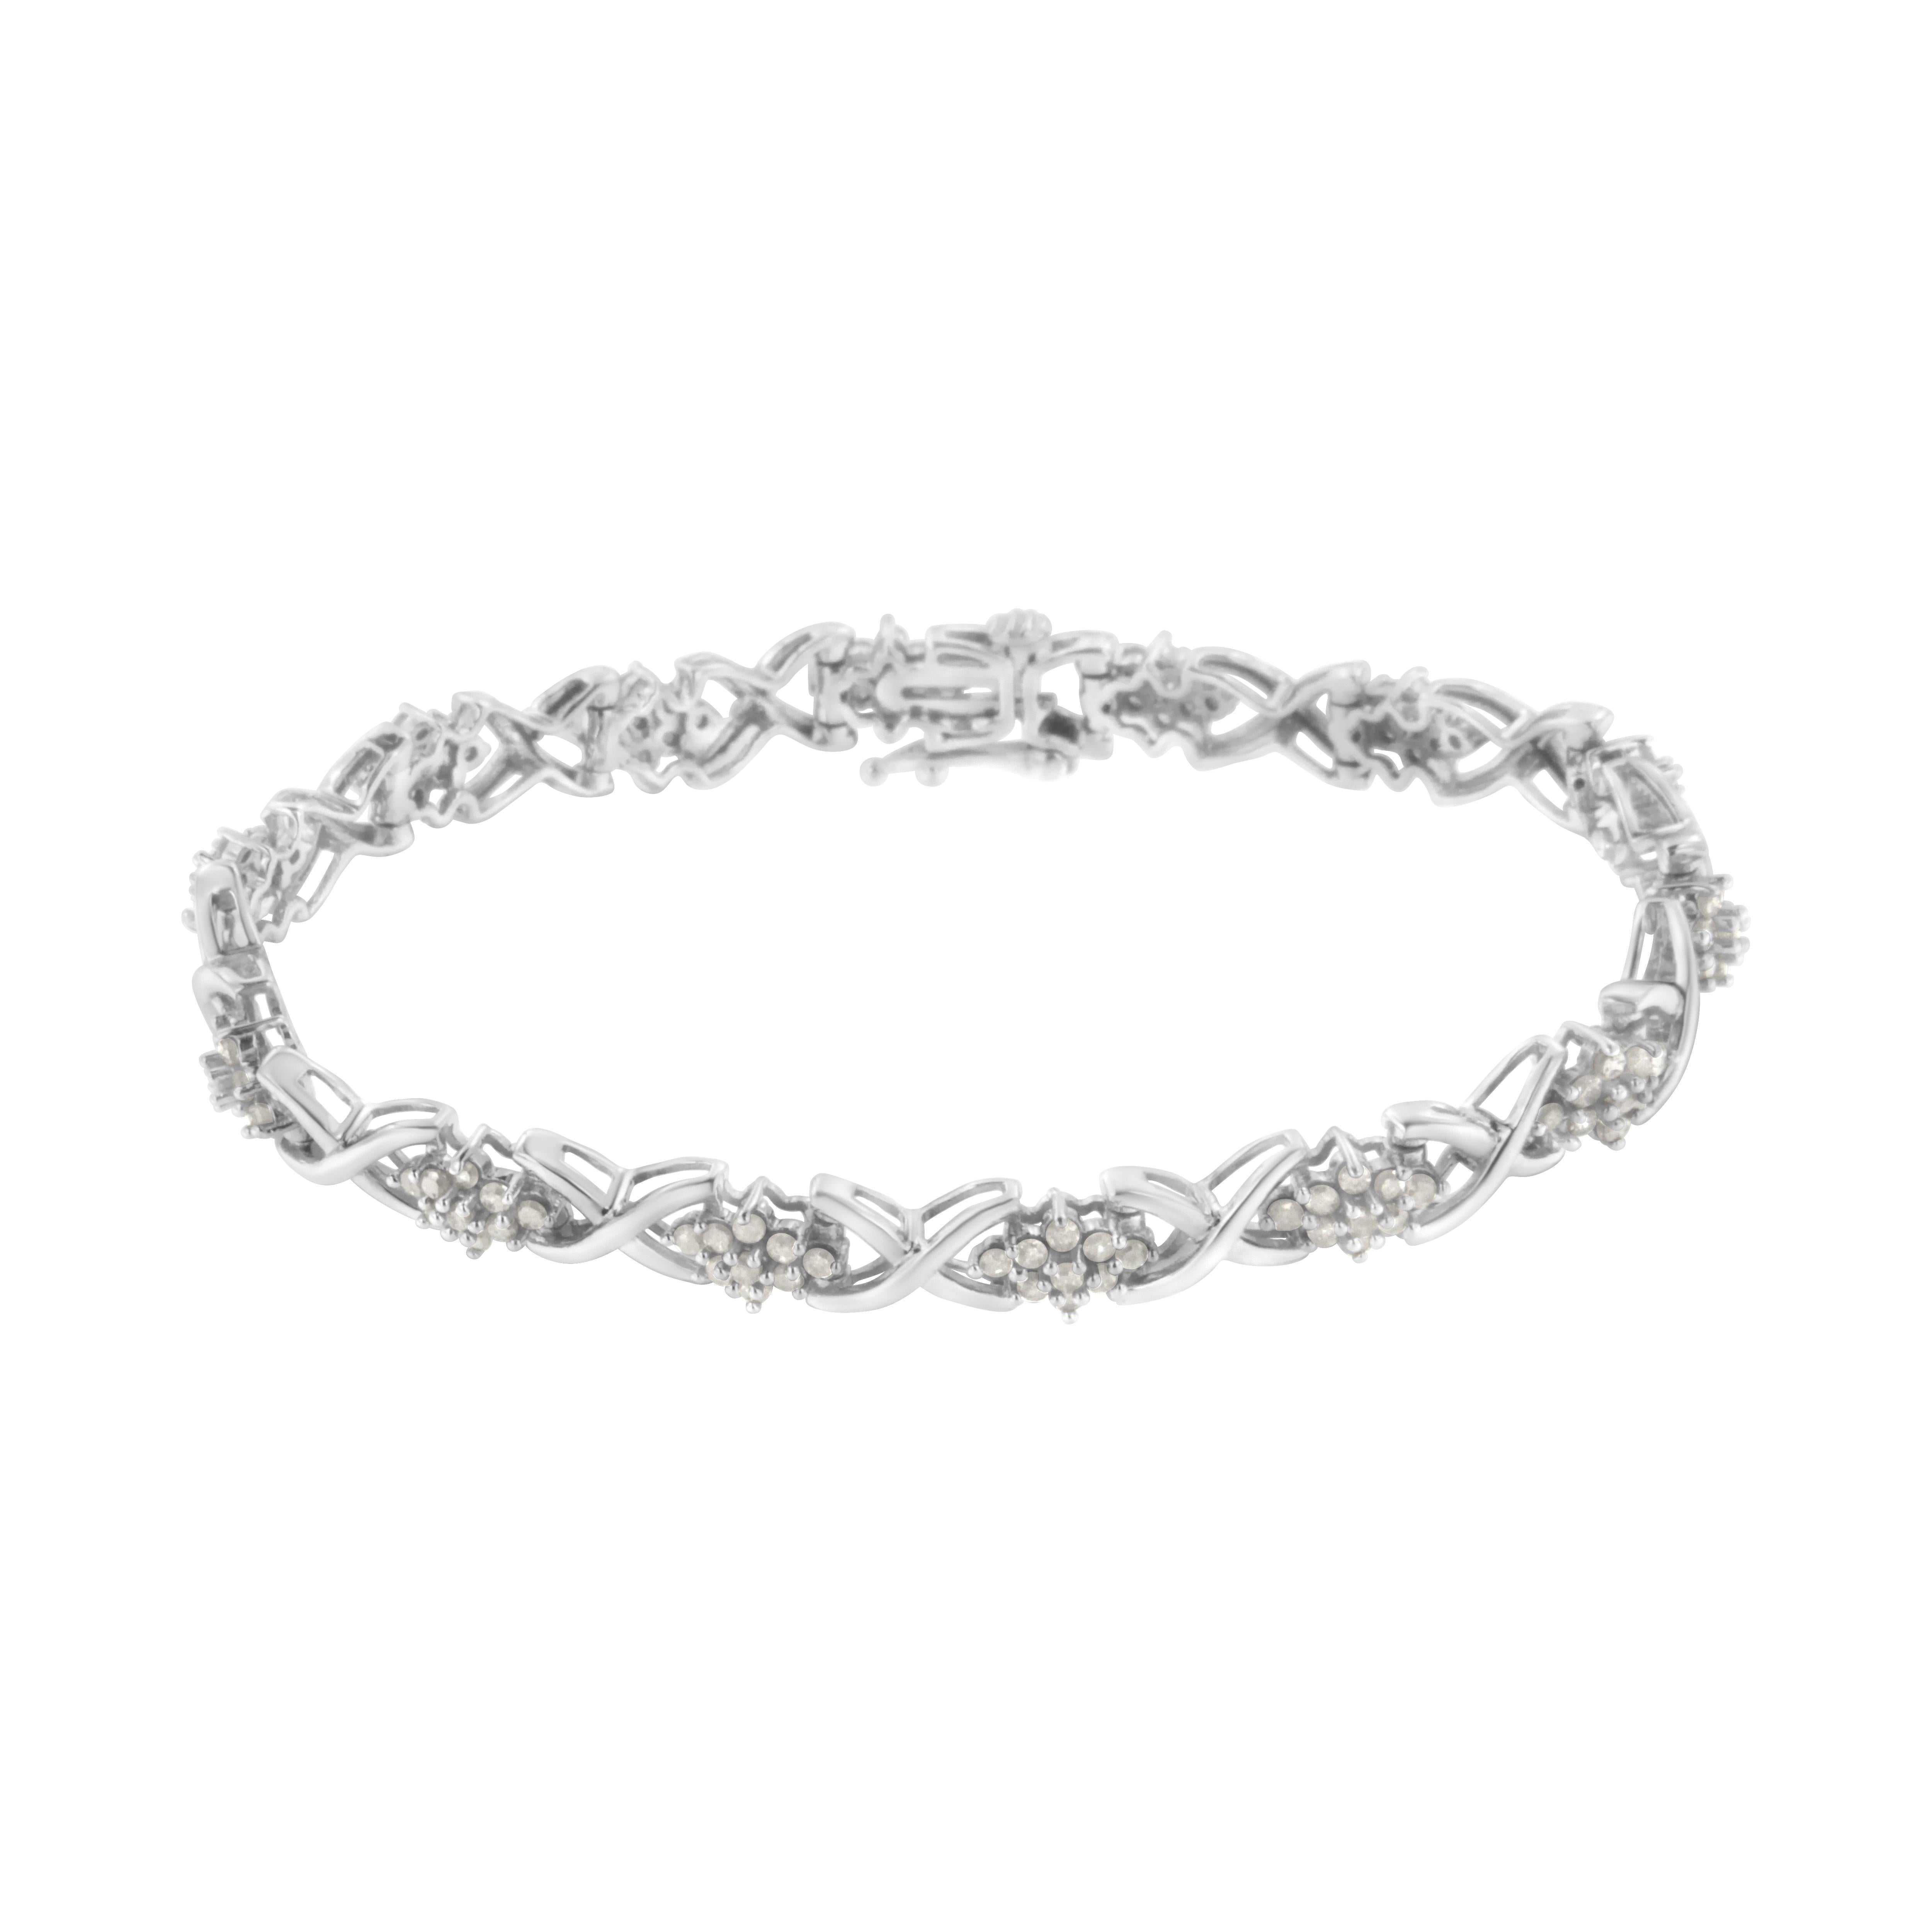 Elegant and timeless, this gorgeous .925 sterling silver tennis bracelet features 2.28 carat total weight of round, rose cut, promo quality diamonds with a whopping 126 stones in all. Rose-cut, promo quality diamonds are milky and cloudy in nature.